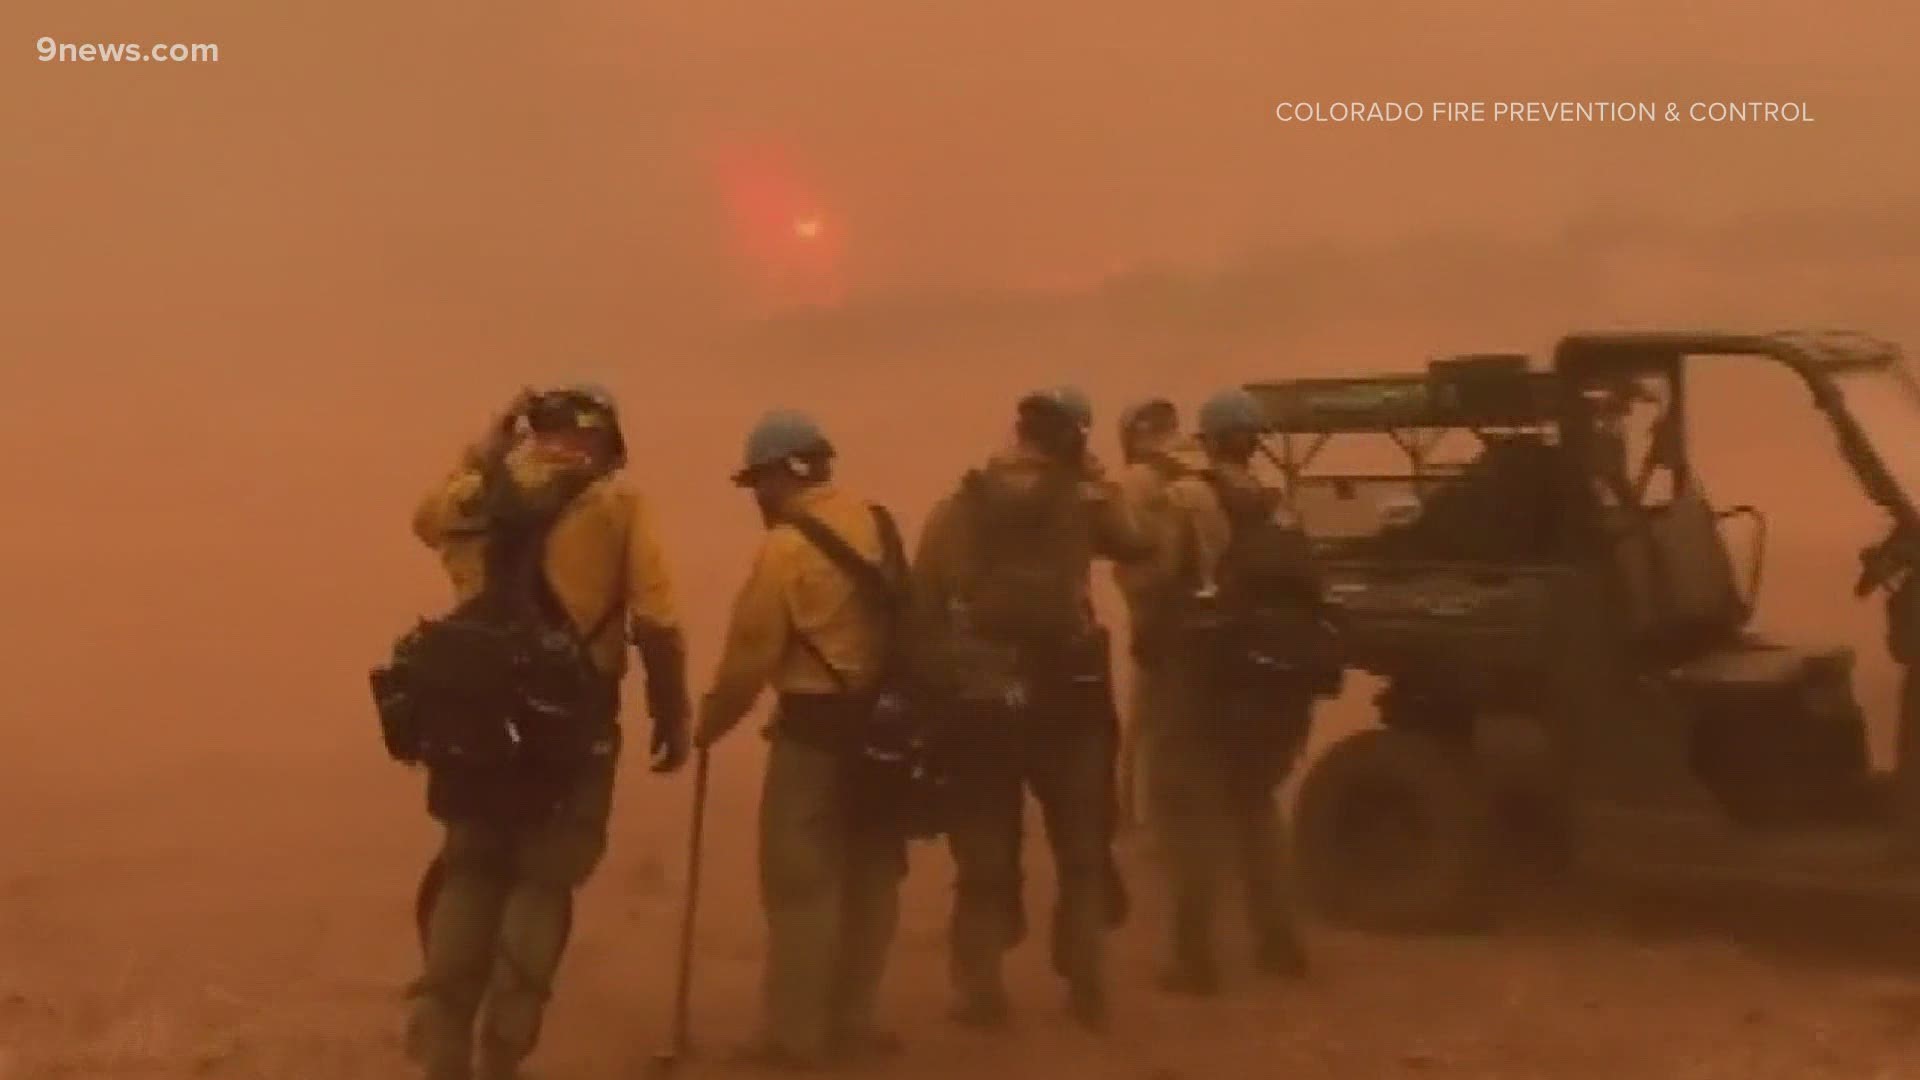 Battalion Chief Dan Battin said it's hard to describe exactly what it's like hearing the roar of a fire as large as the ones burning in Colorado this October.